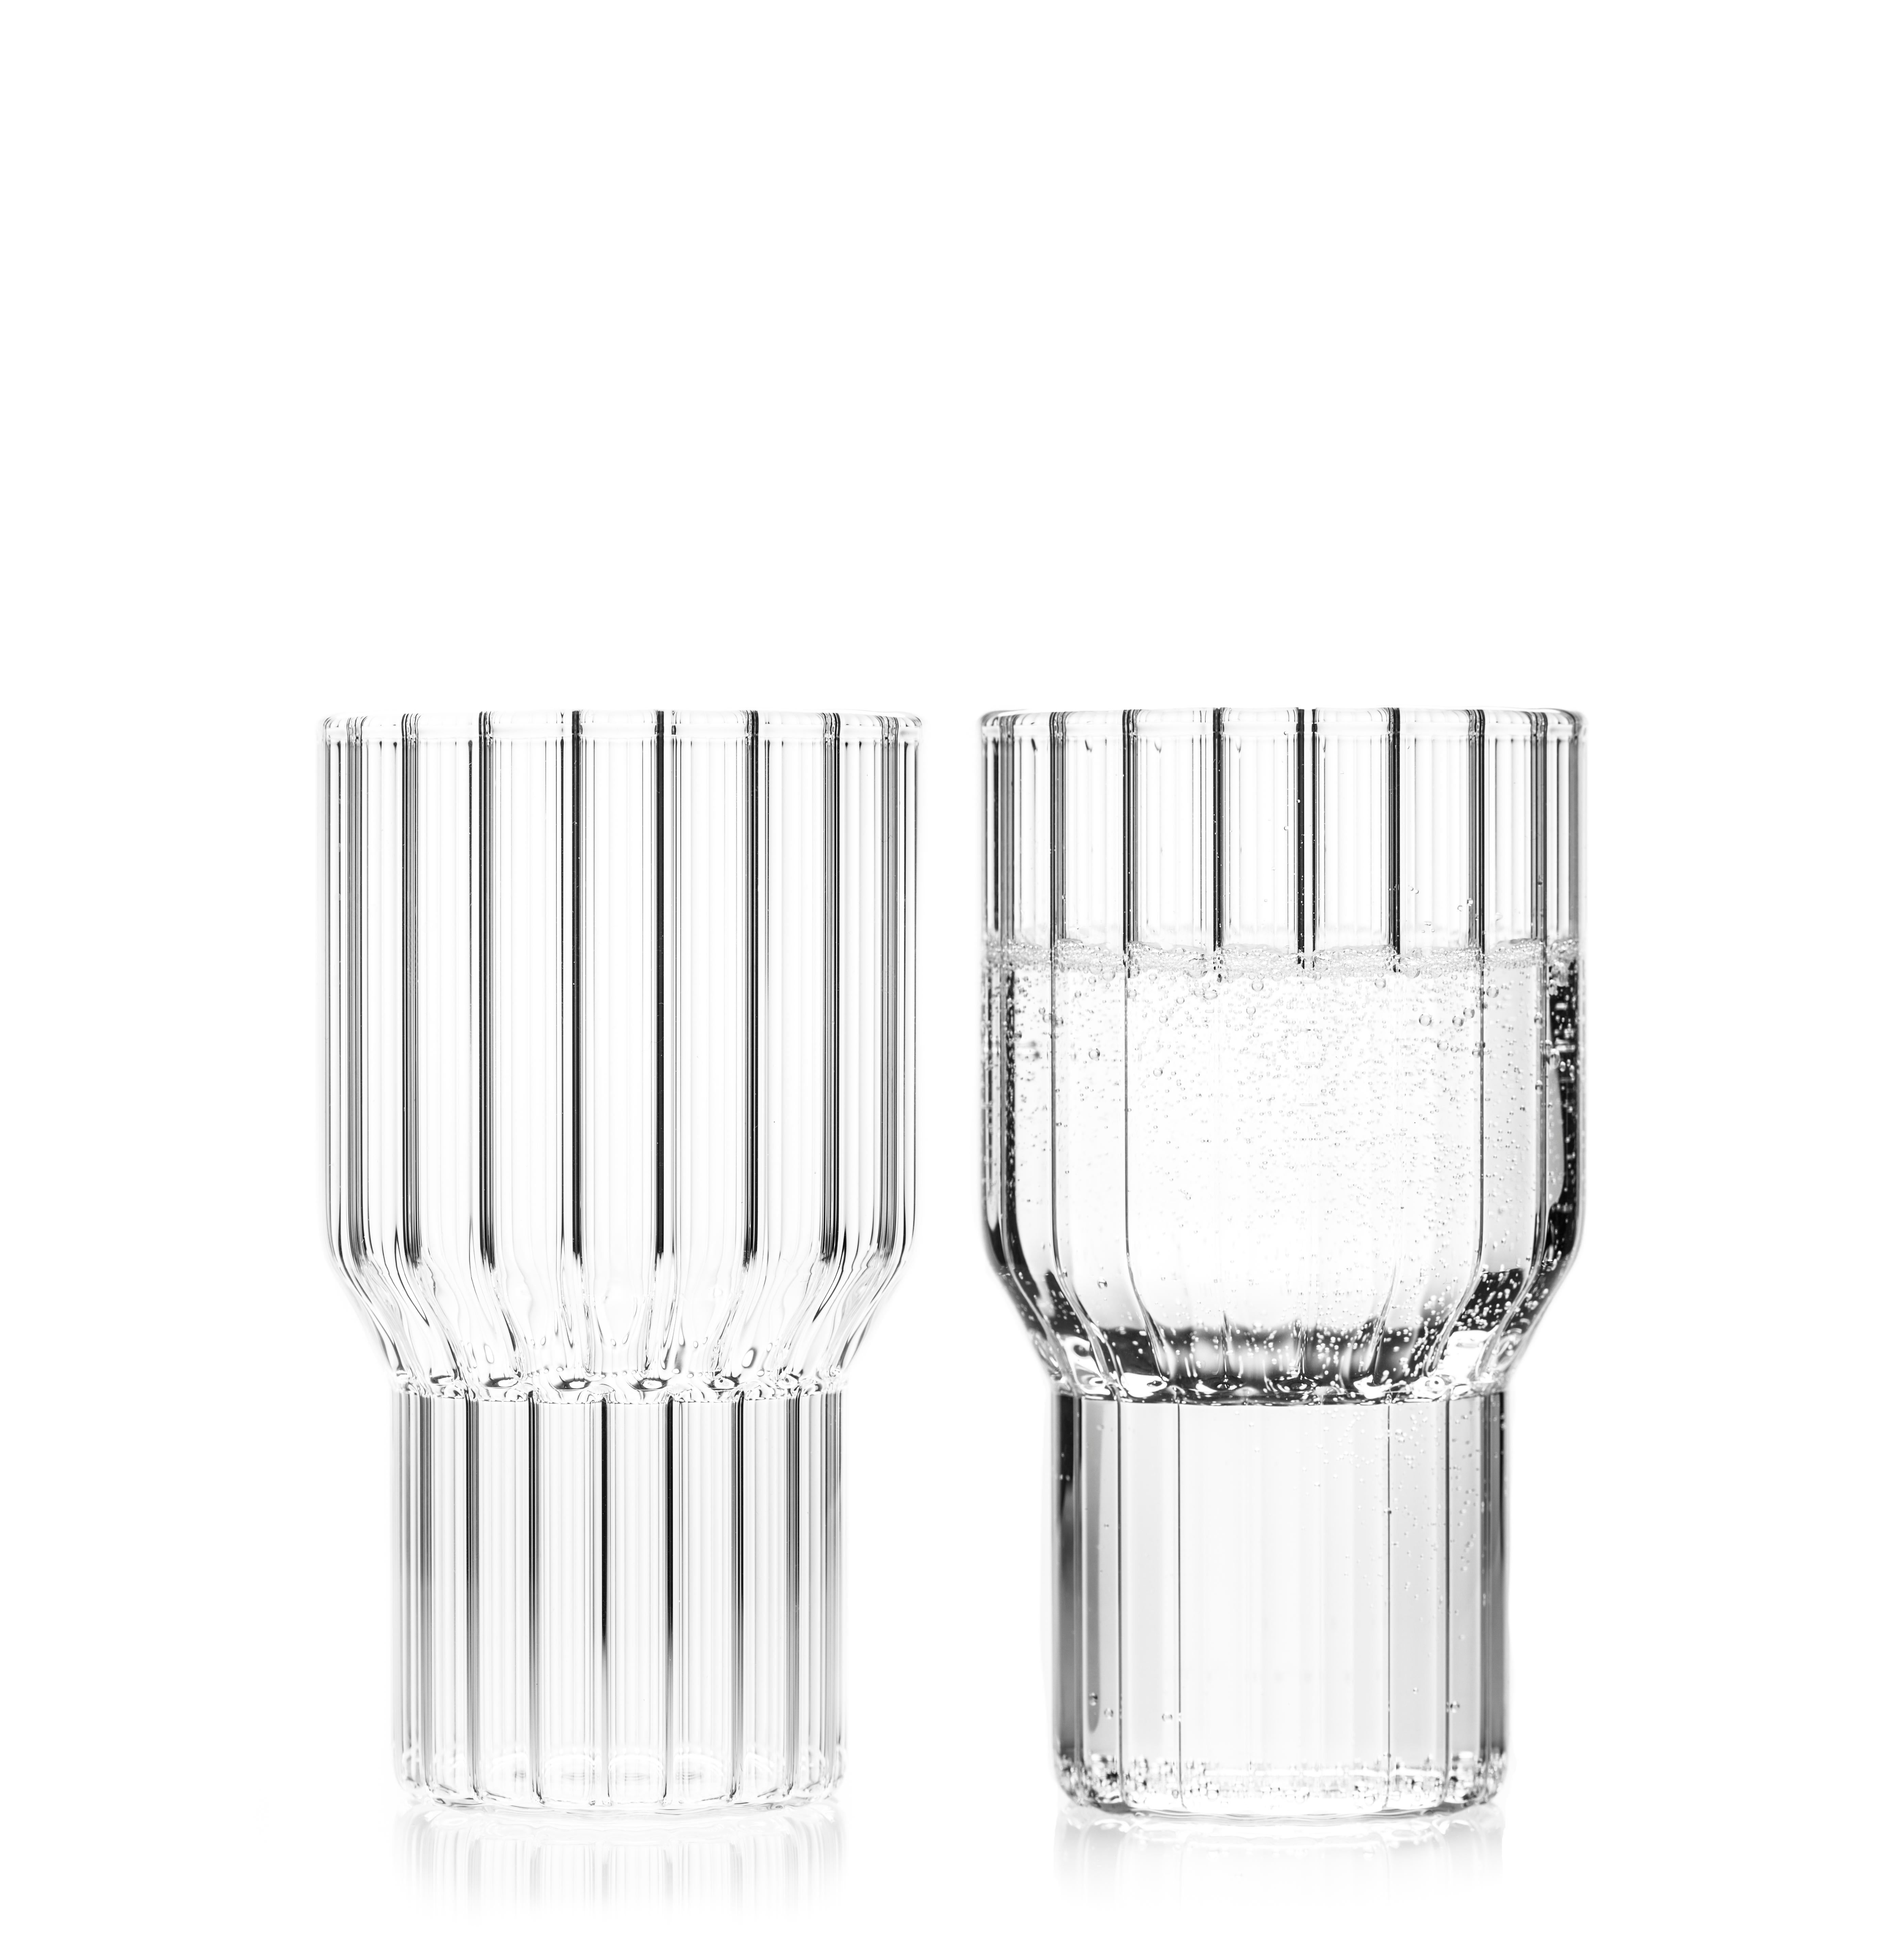 Fluted Boyd large glasses, set of two

The clear Czech contemporary Boyd Glass collection is formally strong, yet with delicate details expressed through the lines and inner fluting. Modern yet retro, the glassware is a timeless design you that